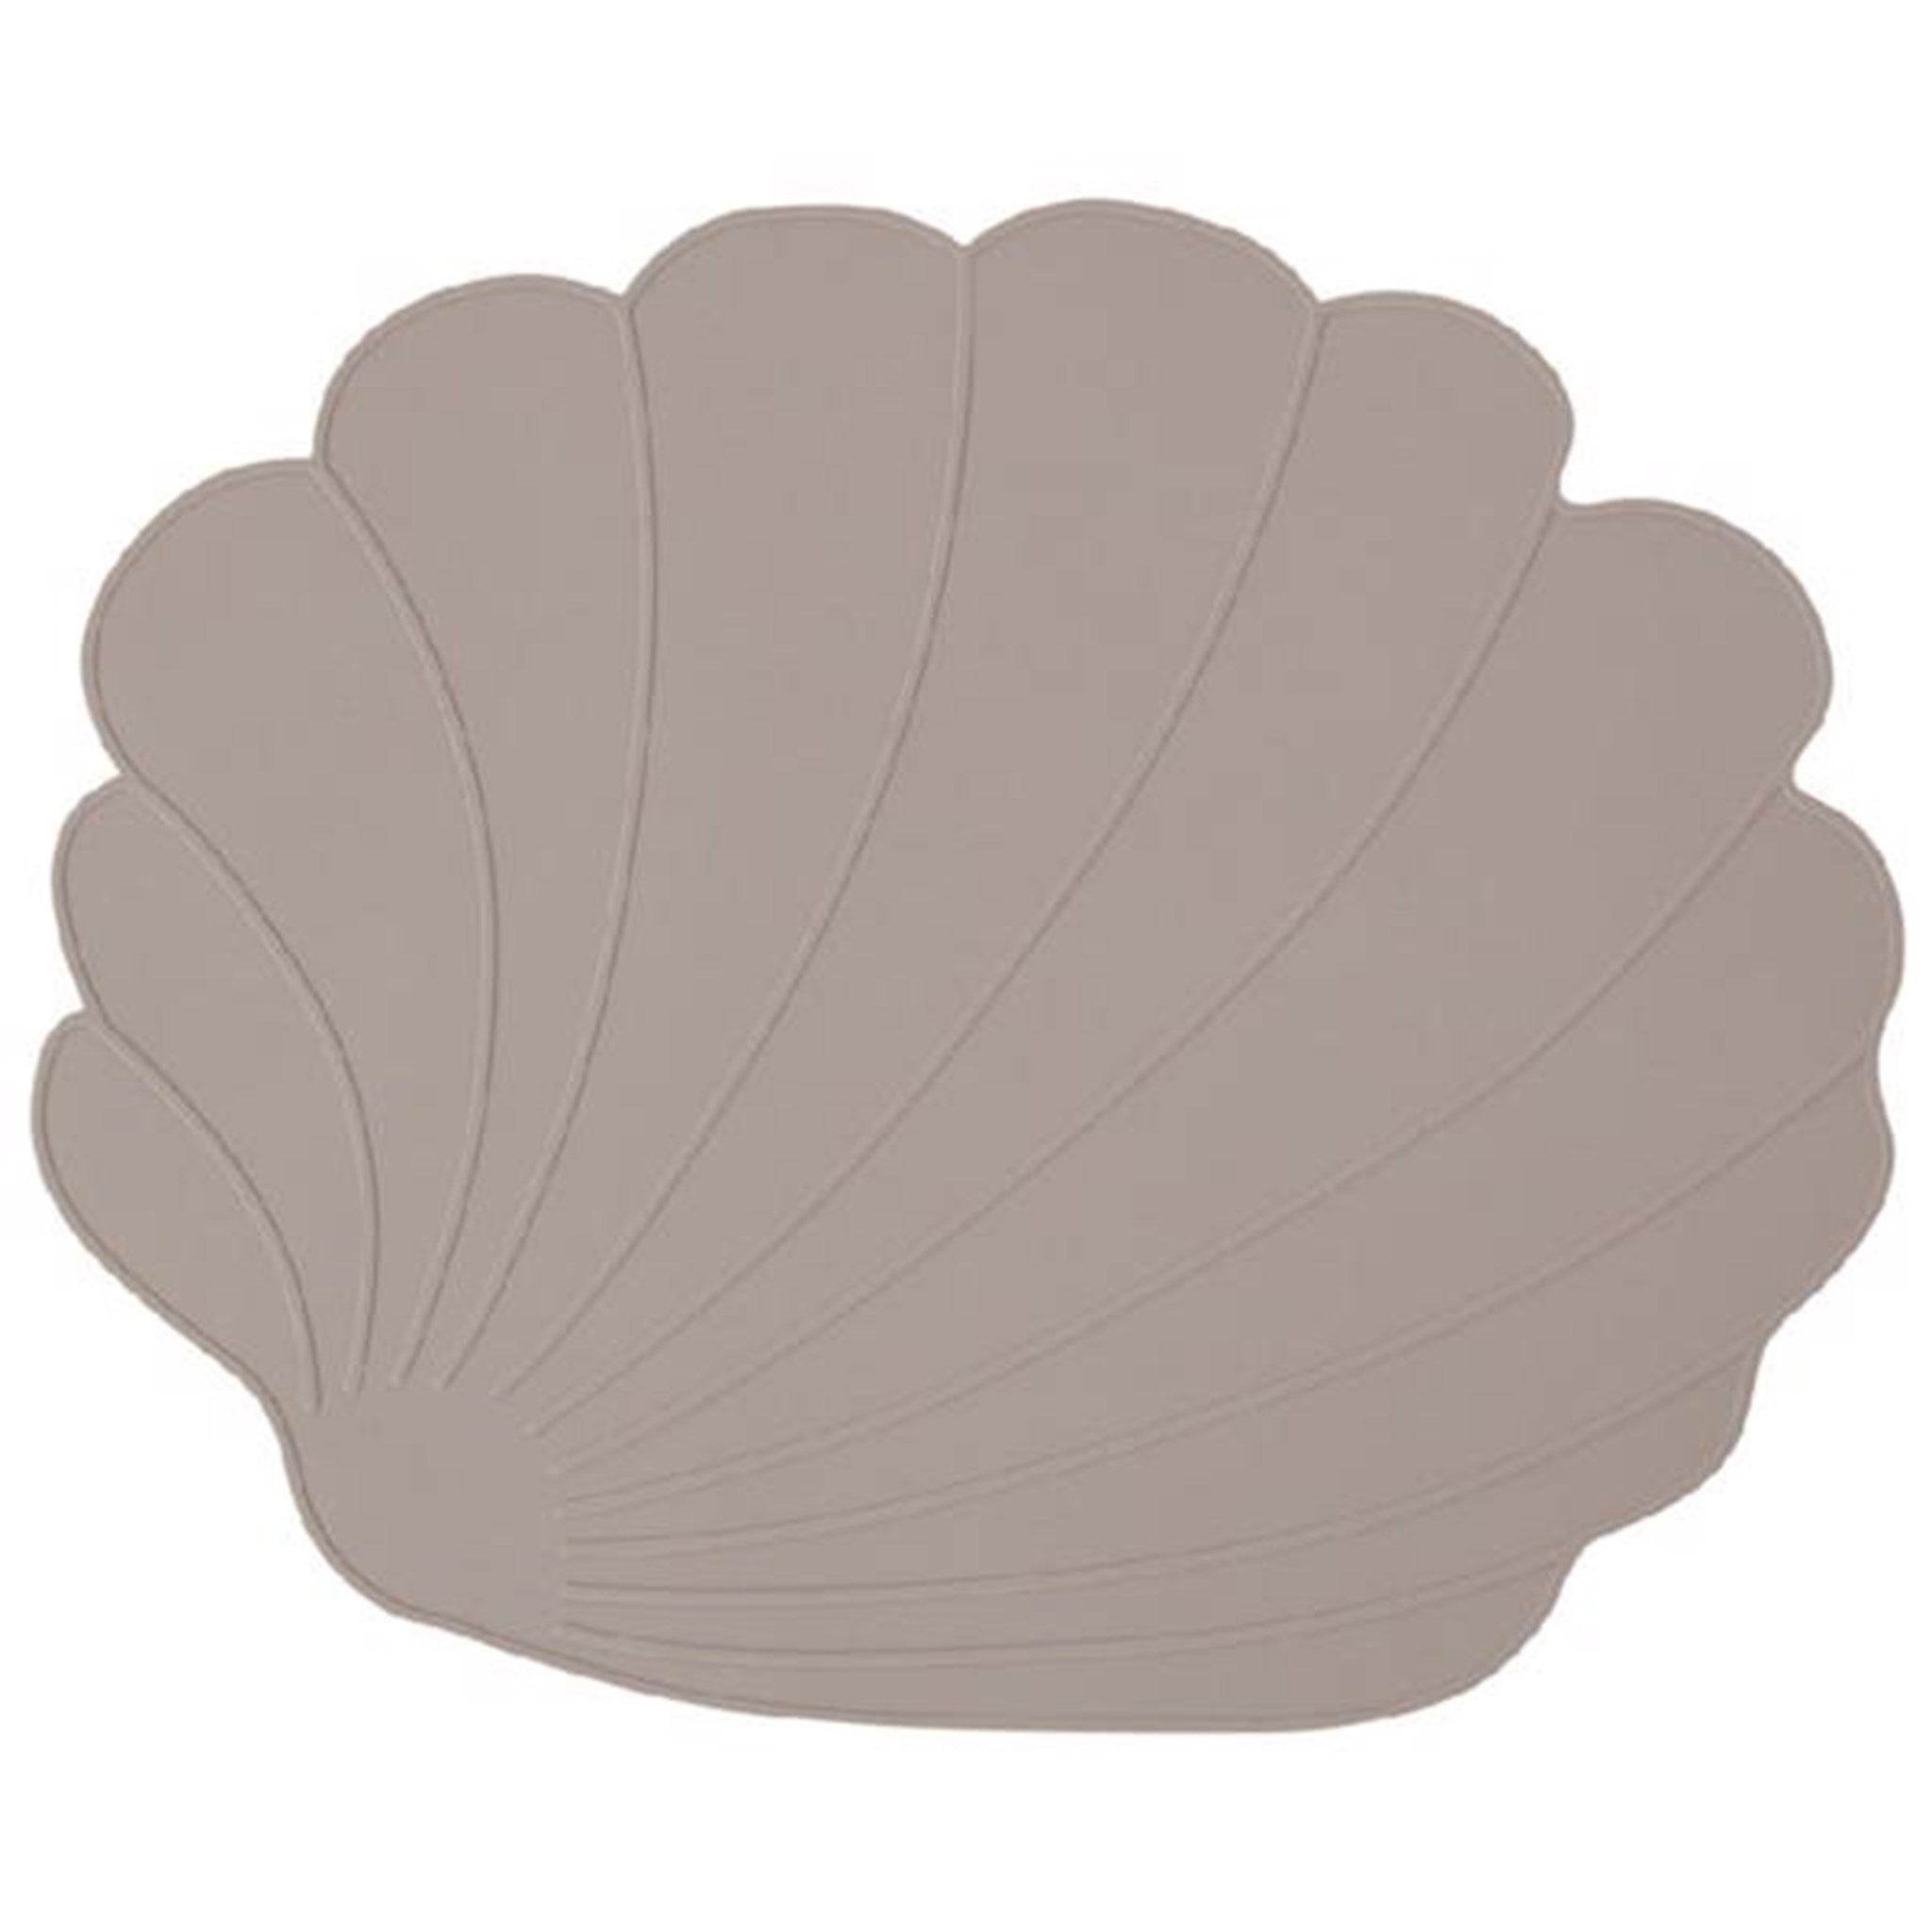 OYOY Placemat Seashell Clay